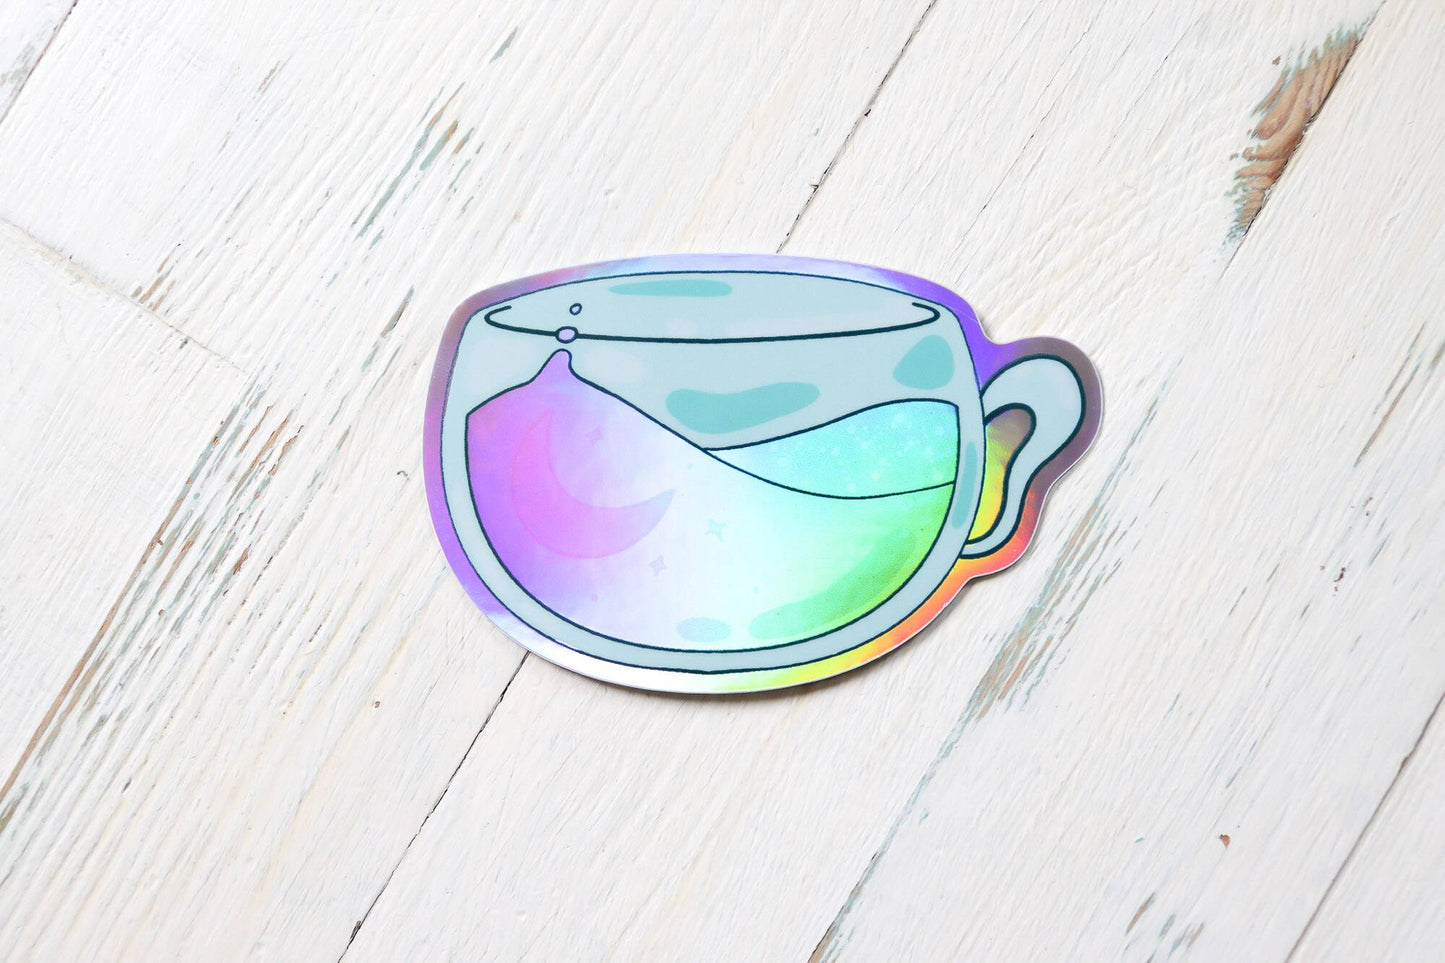 Holographic Sticker - Galaxy Teacup